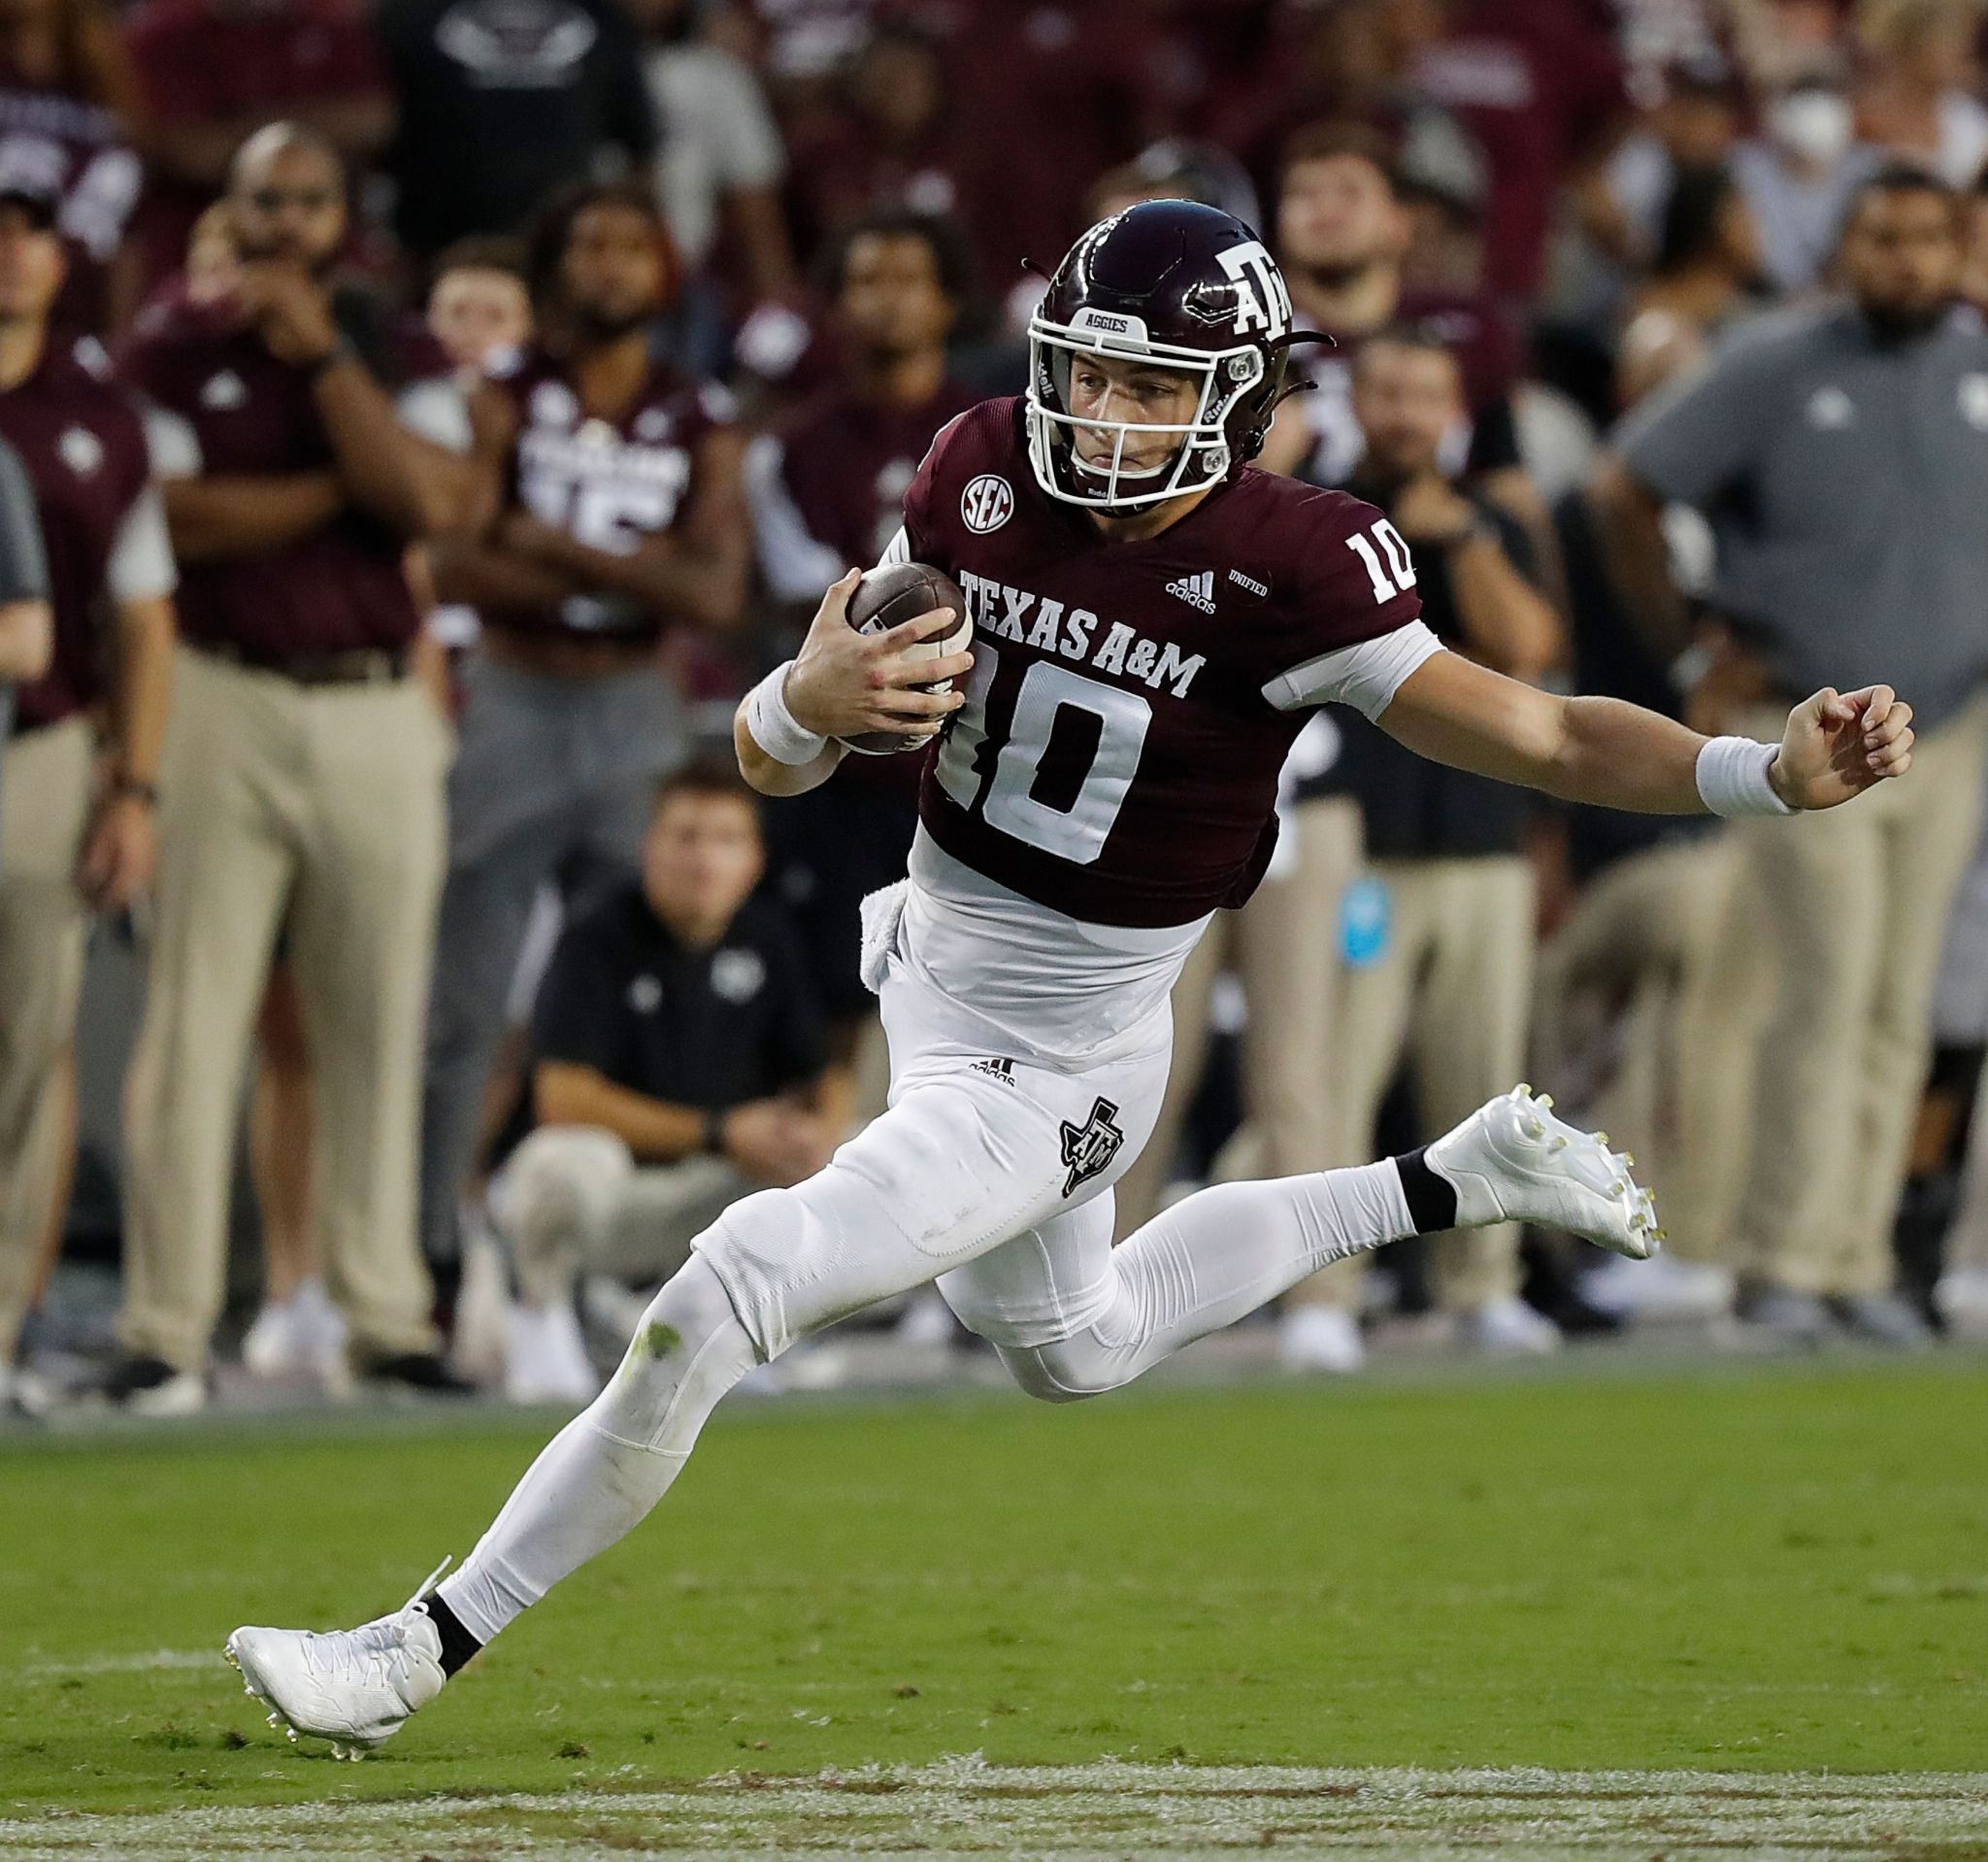 Texas A&M vs. Alabama 5 things to watch with nation’s top team in town